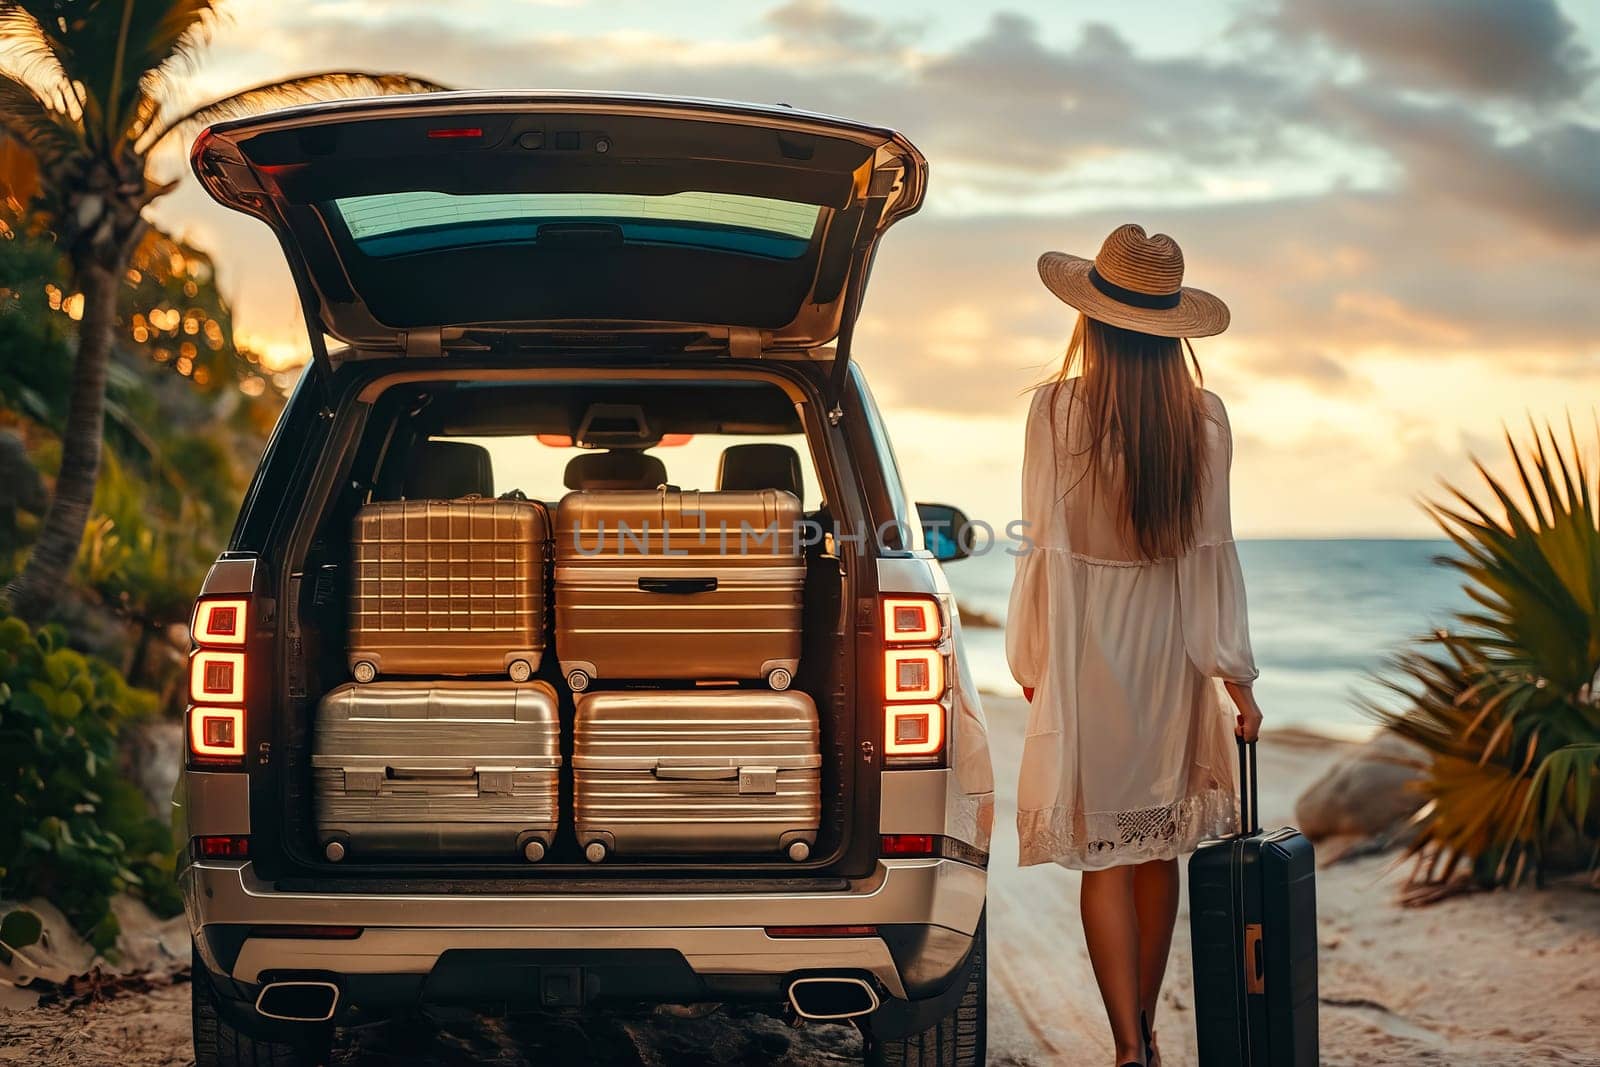 A woman is standing in front of a car with a suitcase and a hat on. The car is full of luggage, and the woman is ready to go on a trip. The scene has a relaxed and adventurous mood. Generative AI